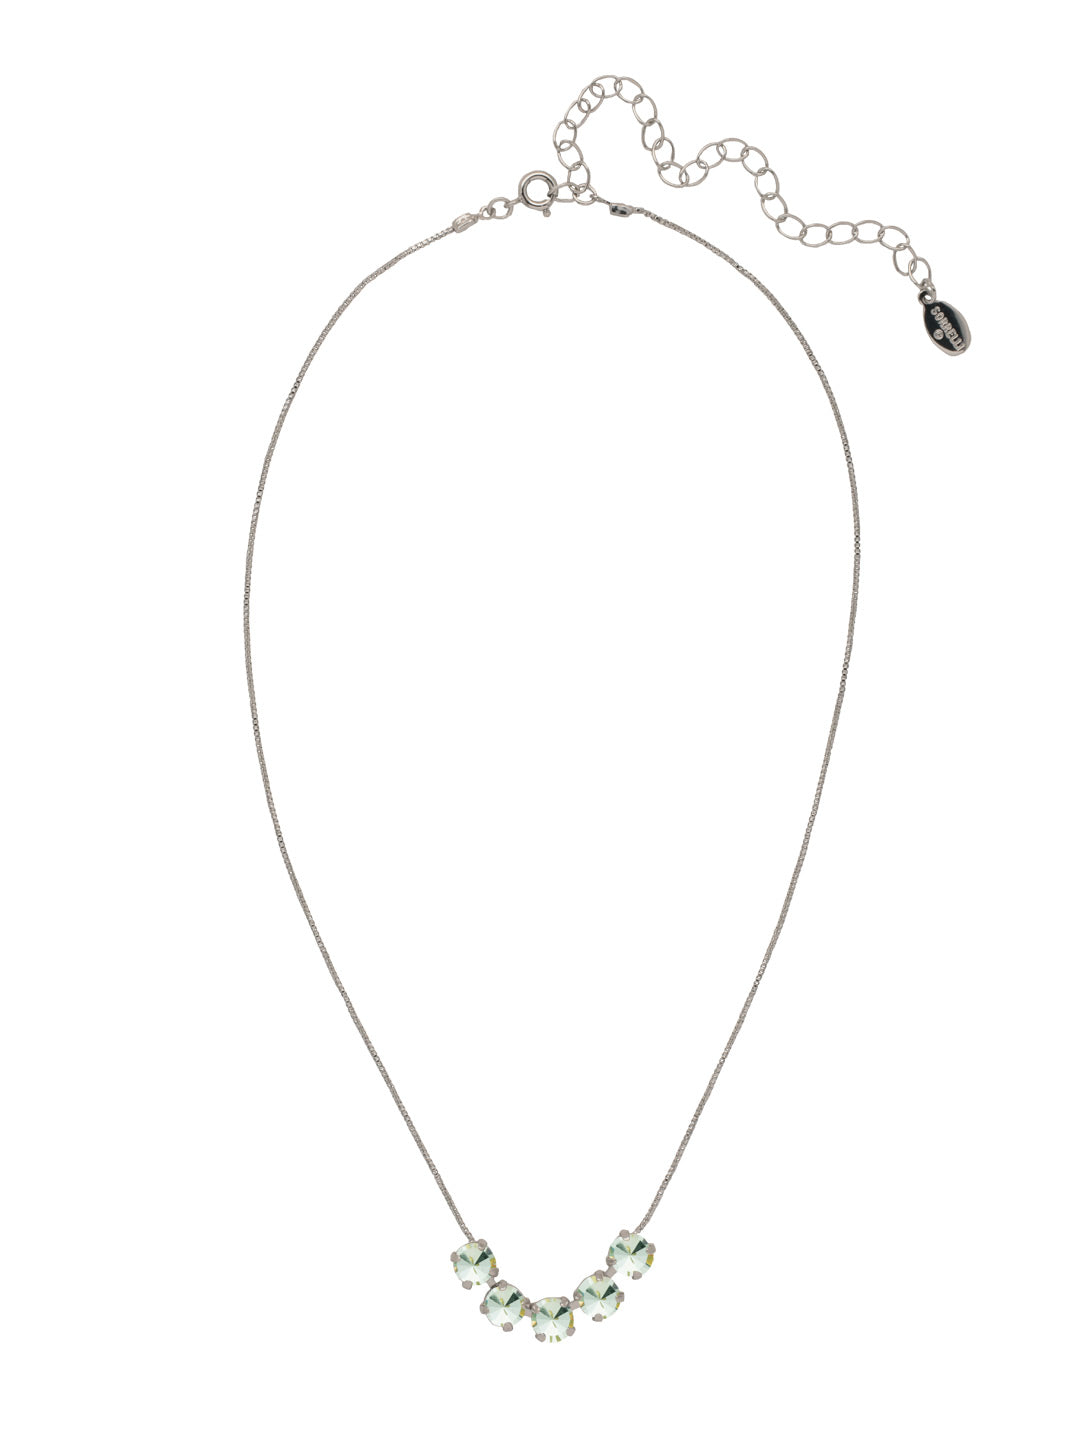 Shaughna Tennis Necklace - NFC84PDMIN - <p>The Shaughna Tennis Necklace features five crystals on a delicate adjustable chain. From Sorrelli's Mint collection in our Palladium finish.</p>